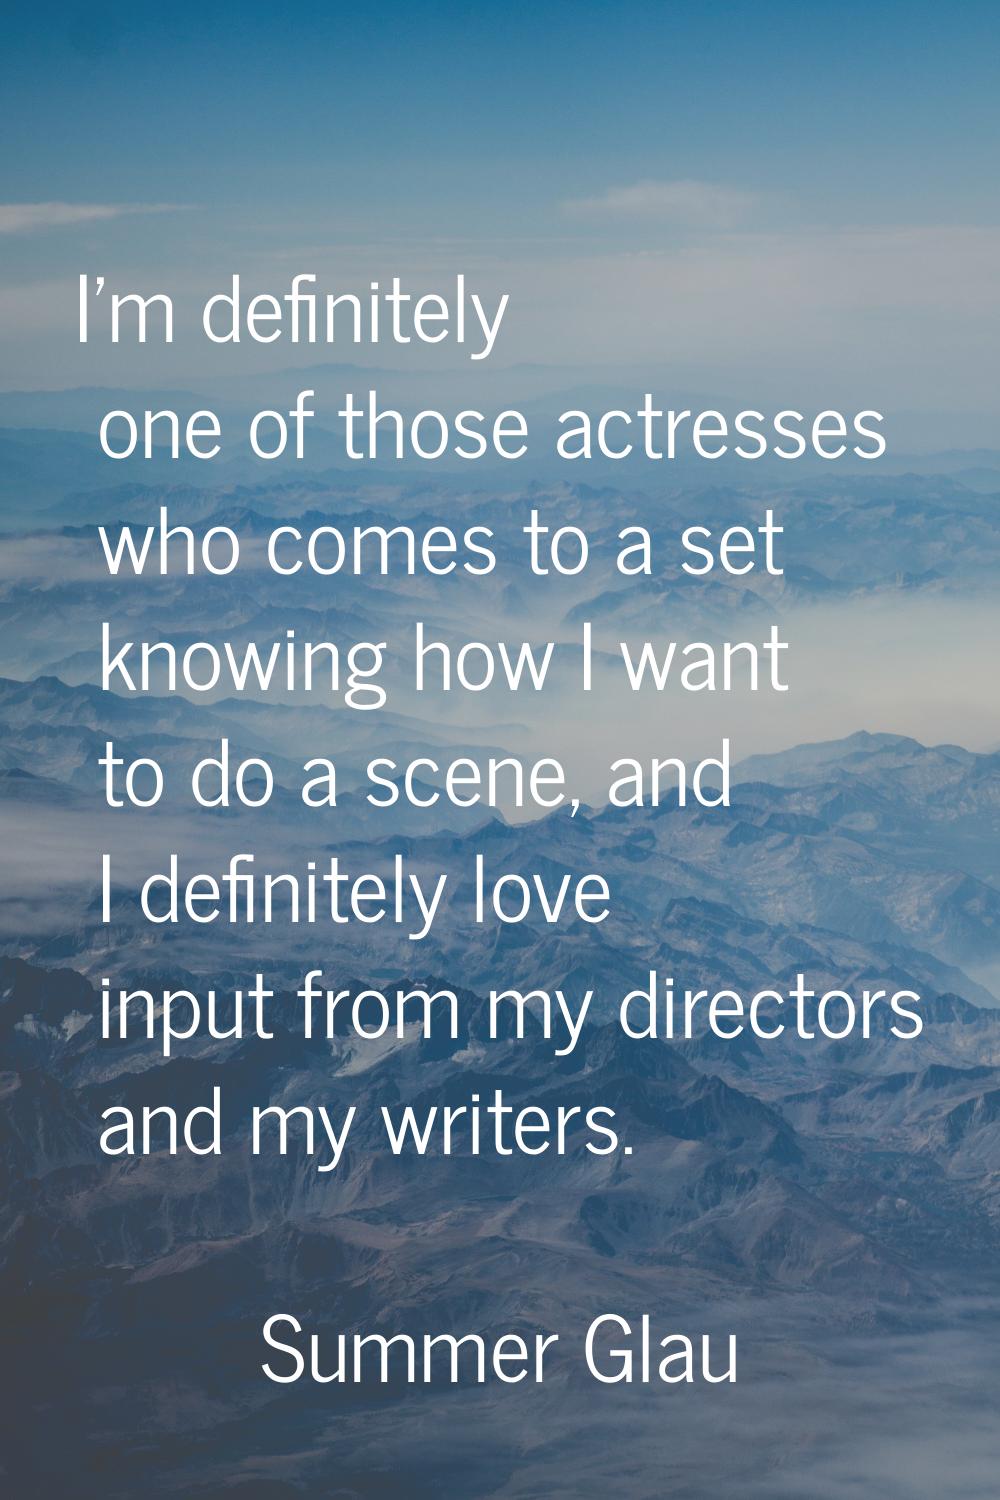 I'm definitely one of those actresses who comes to a set knowing how I want to do a scene, and I de